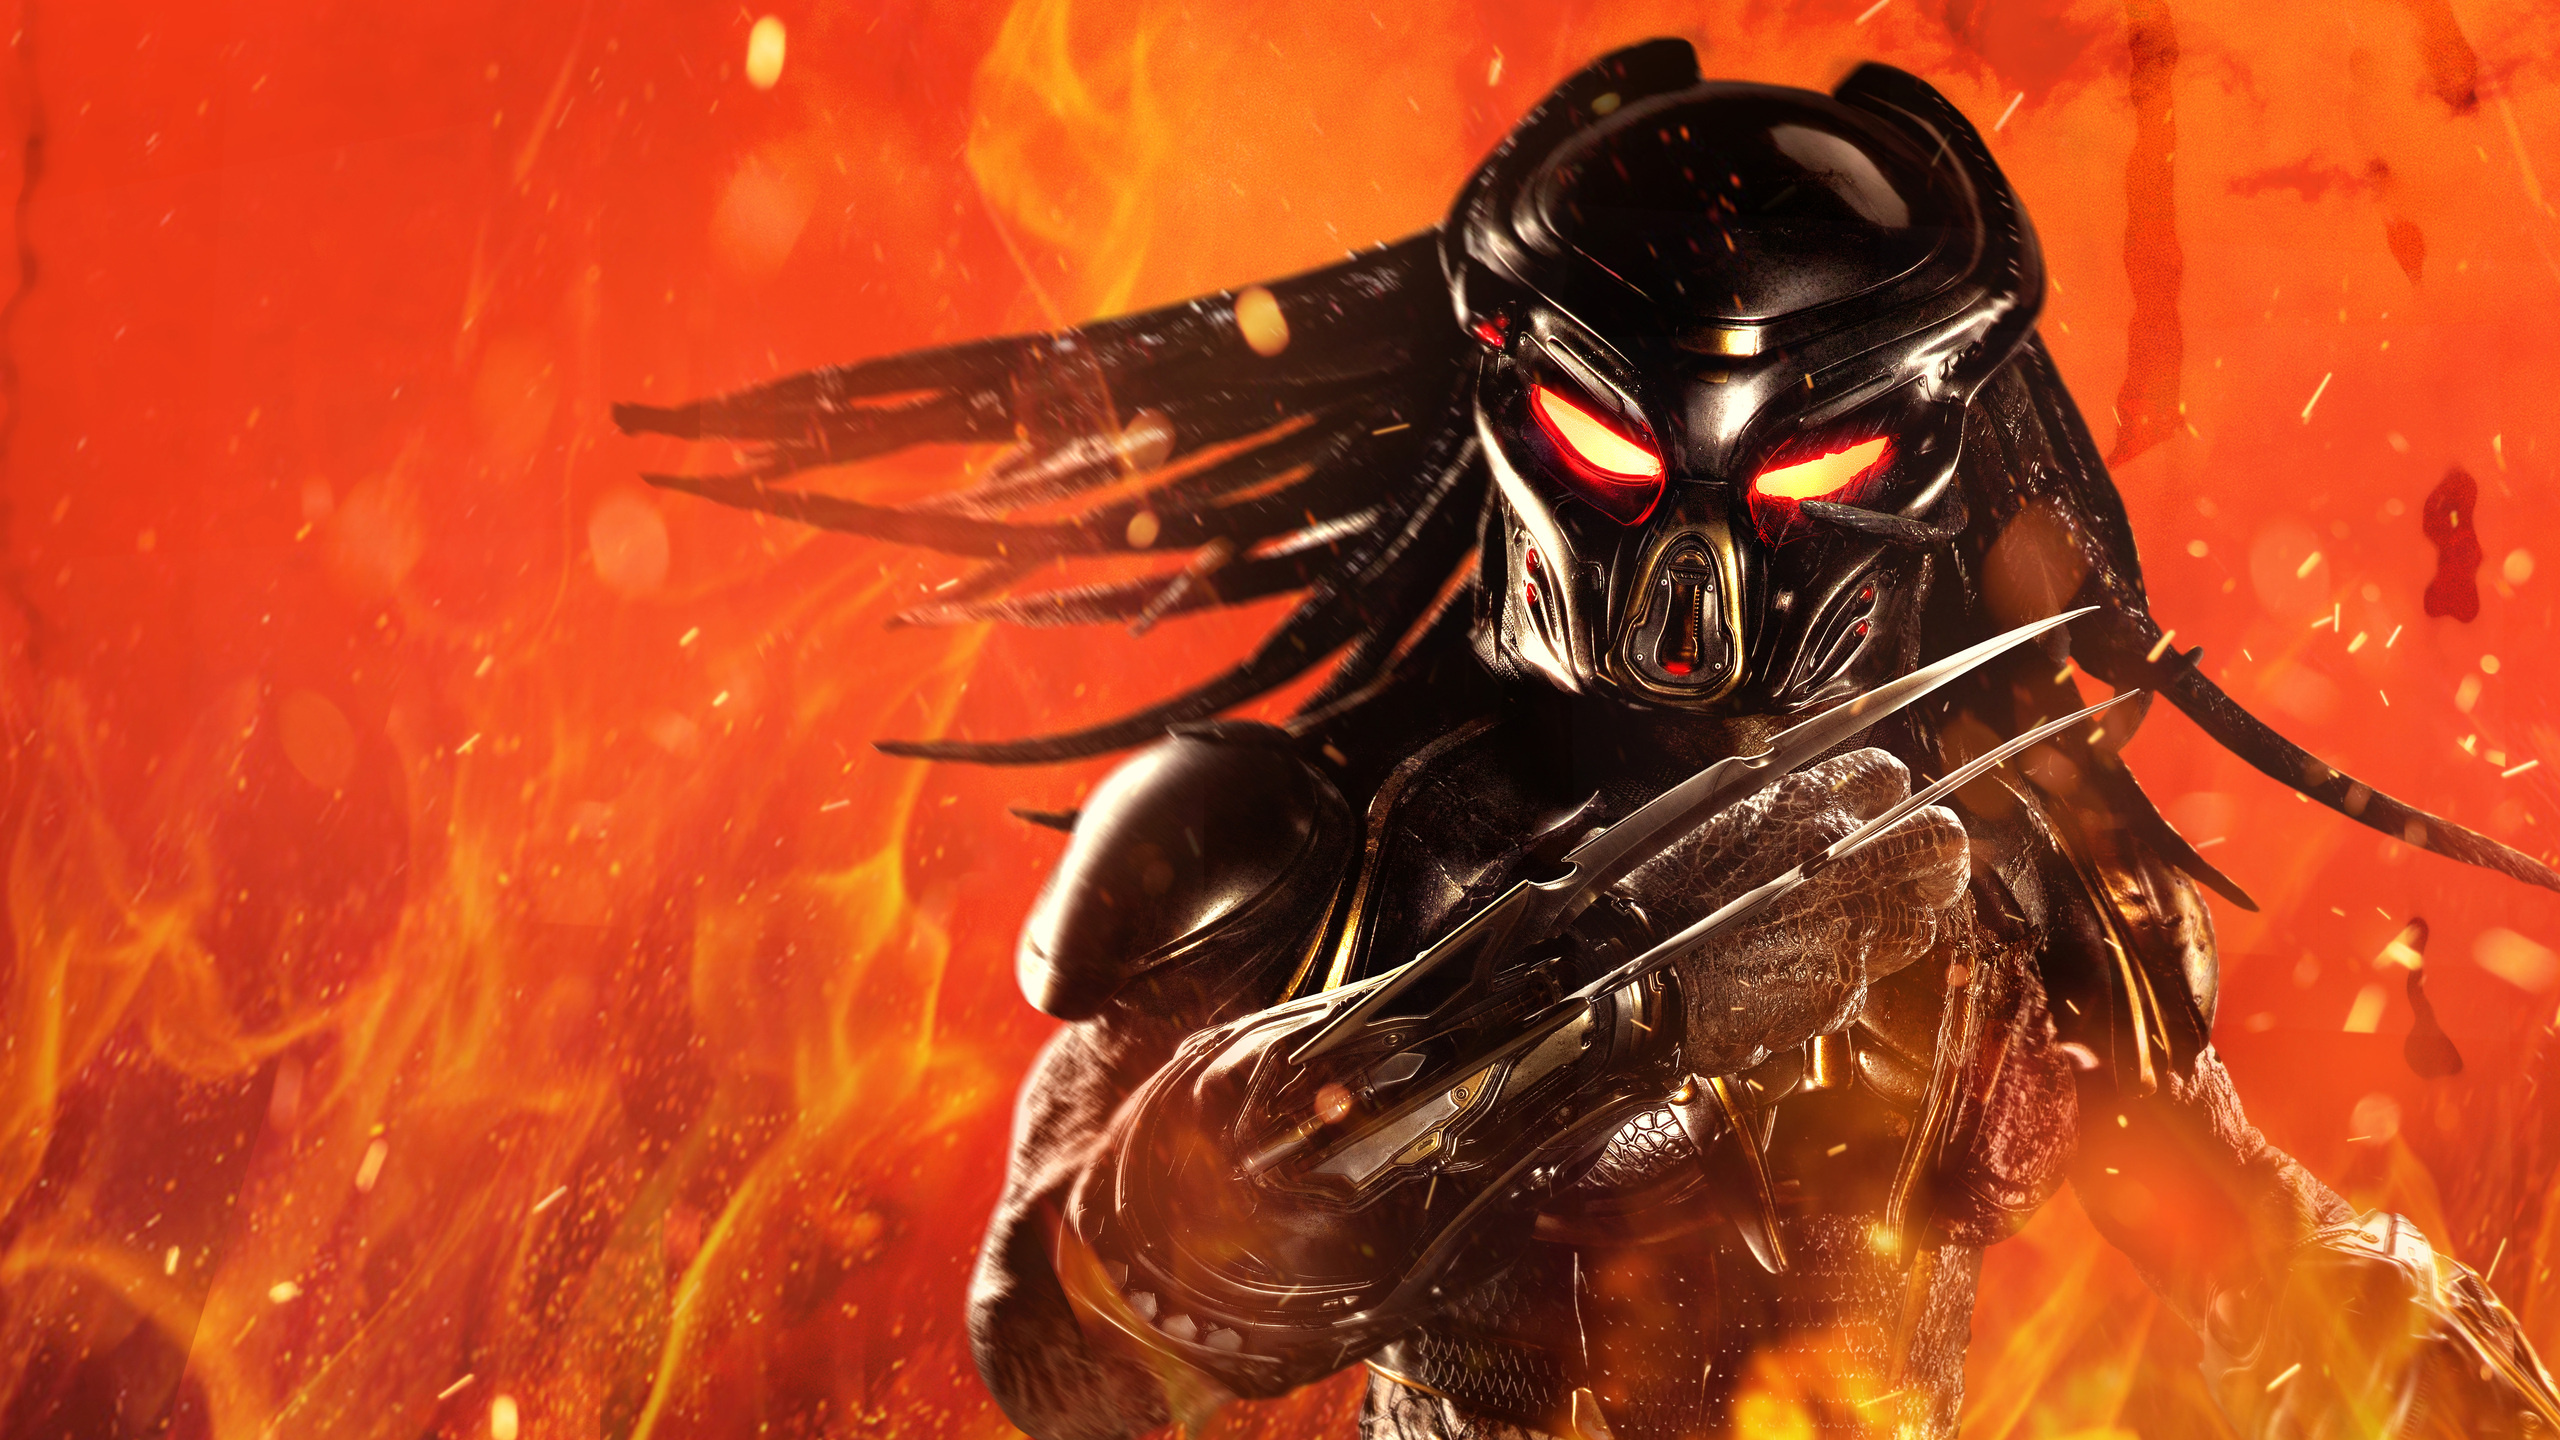 Predator: Have a unique vocalization, which includes growls, clicks, and roars. 2560x1440 HD Wallpaper.